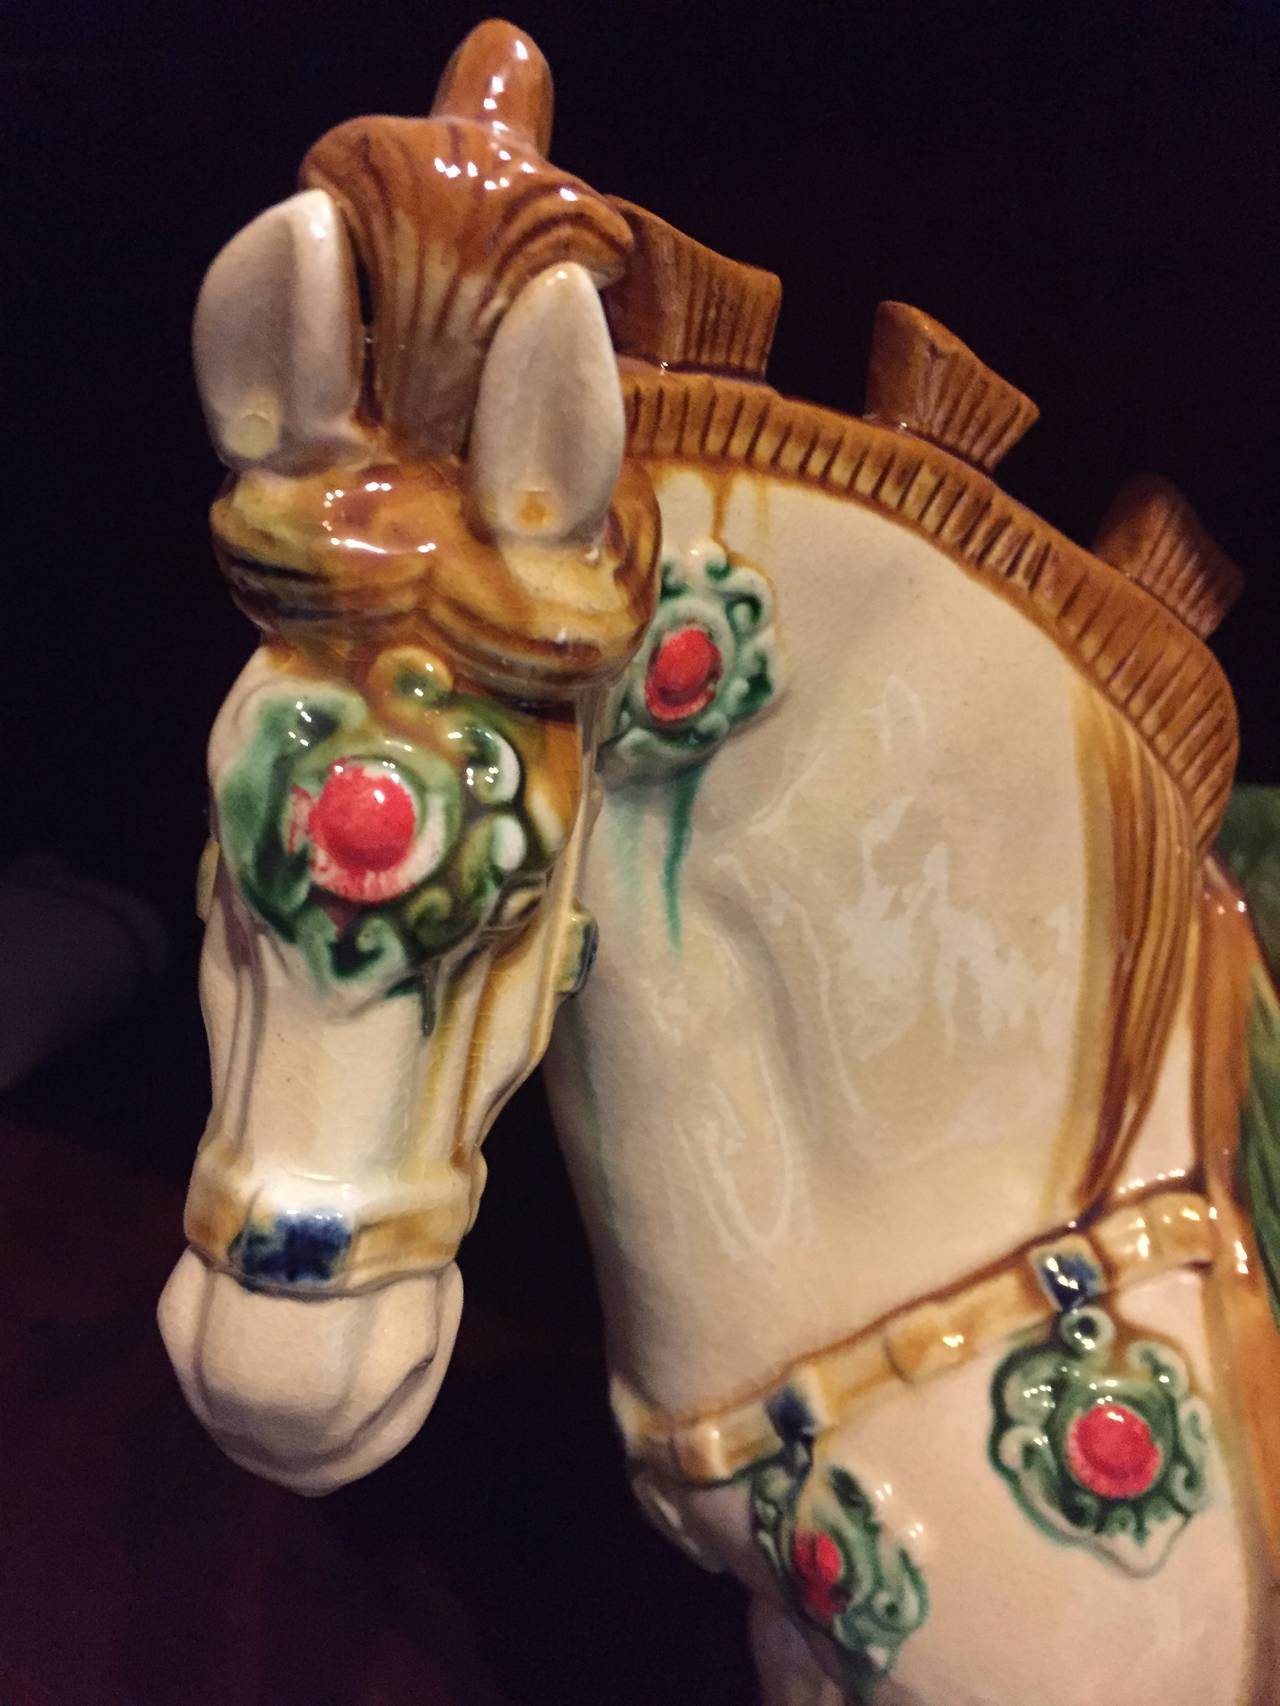 Horse in the Chinese culture symbolizes success. Our beautiful terracotta horse is hand made and painted using the ancient San Cai Tri-Glaze techniques. The splendid glossy glaze and vivid depiction of the horse make it a fantastic focal point.